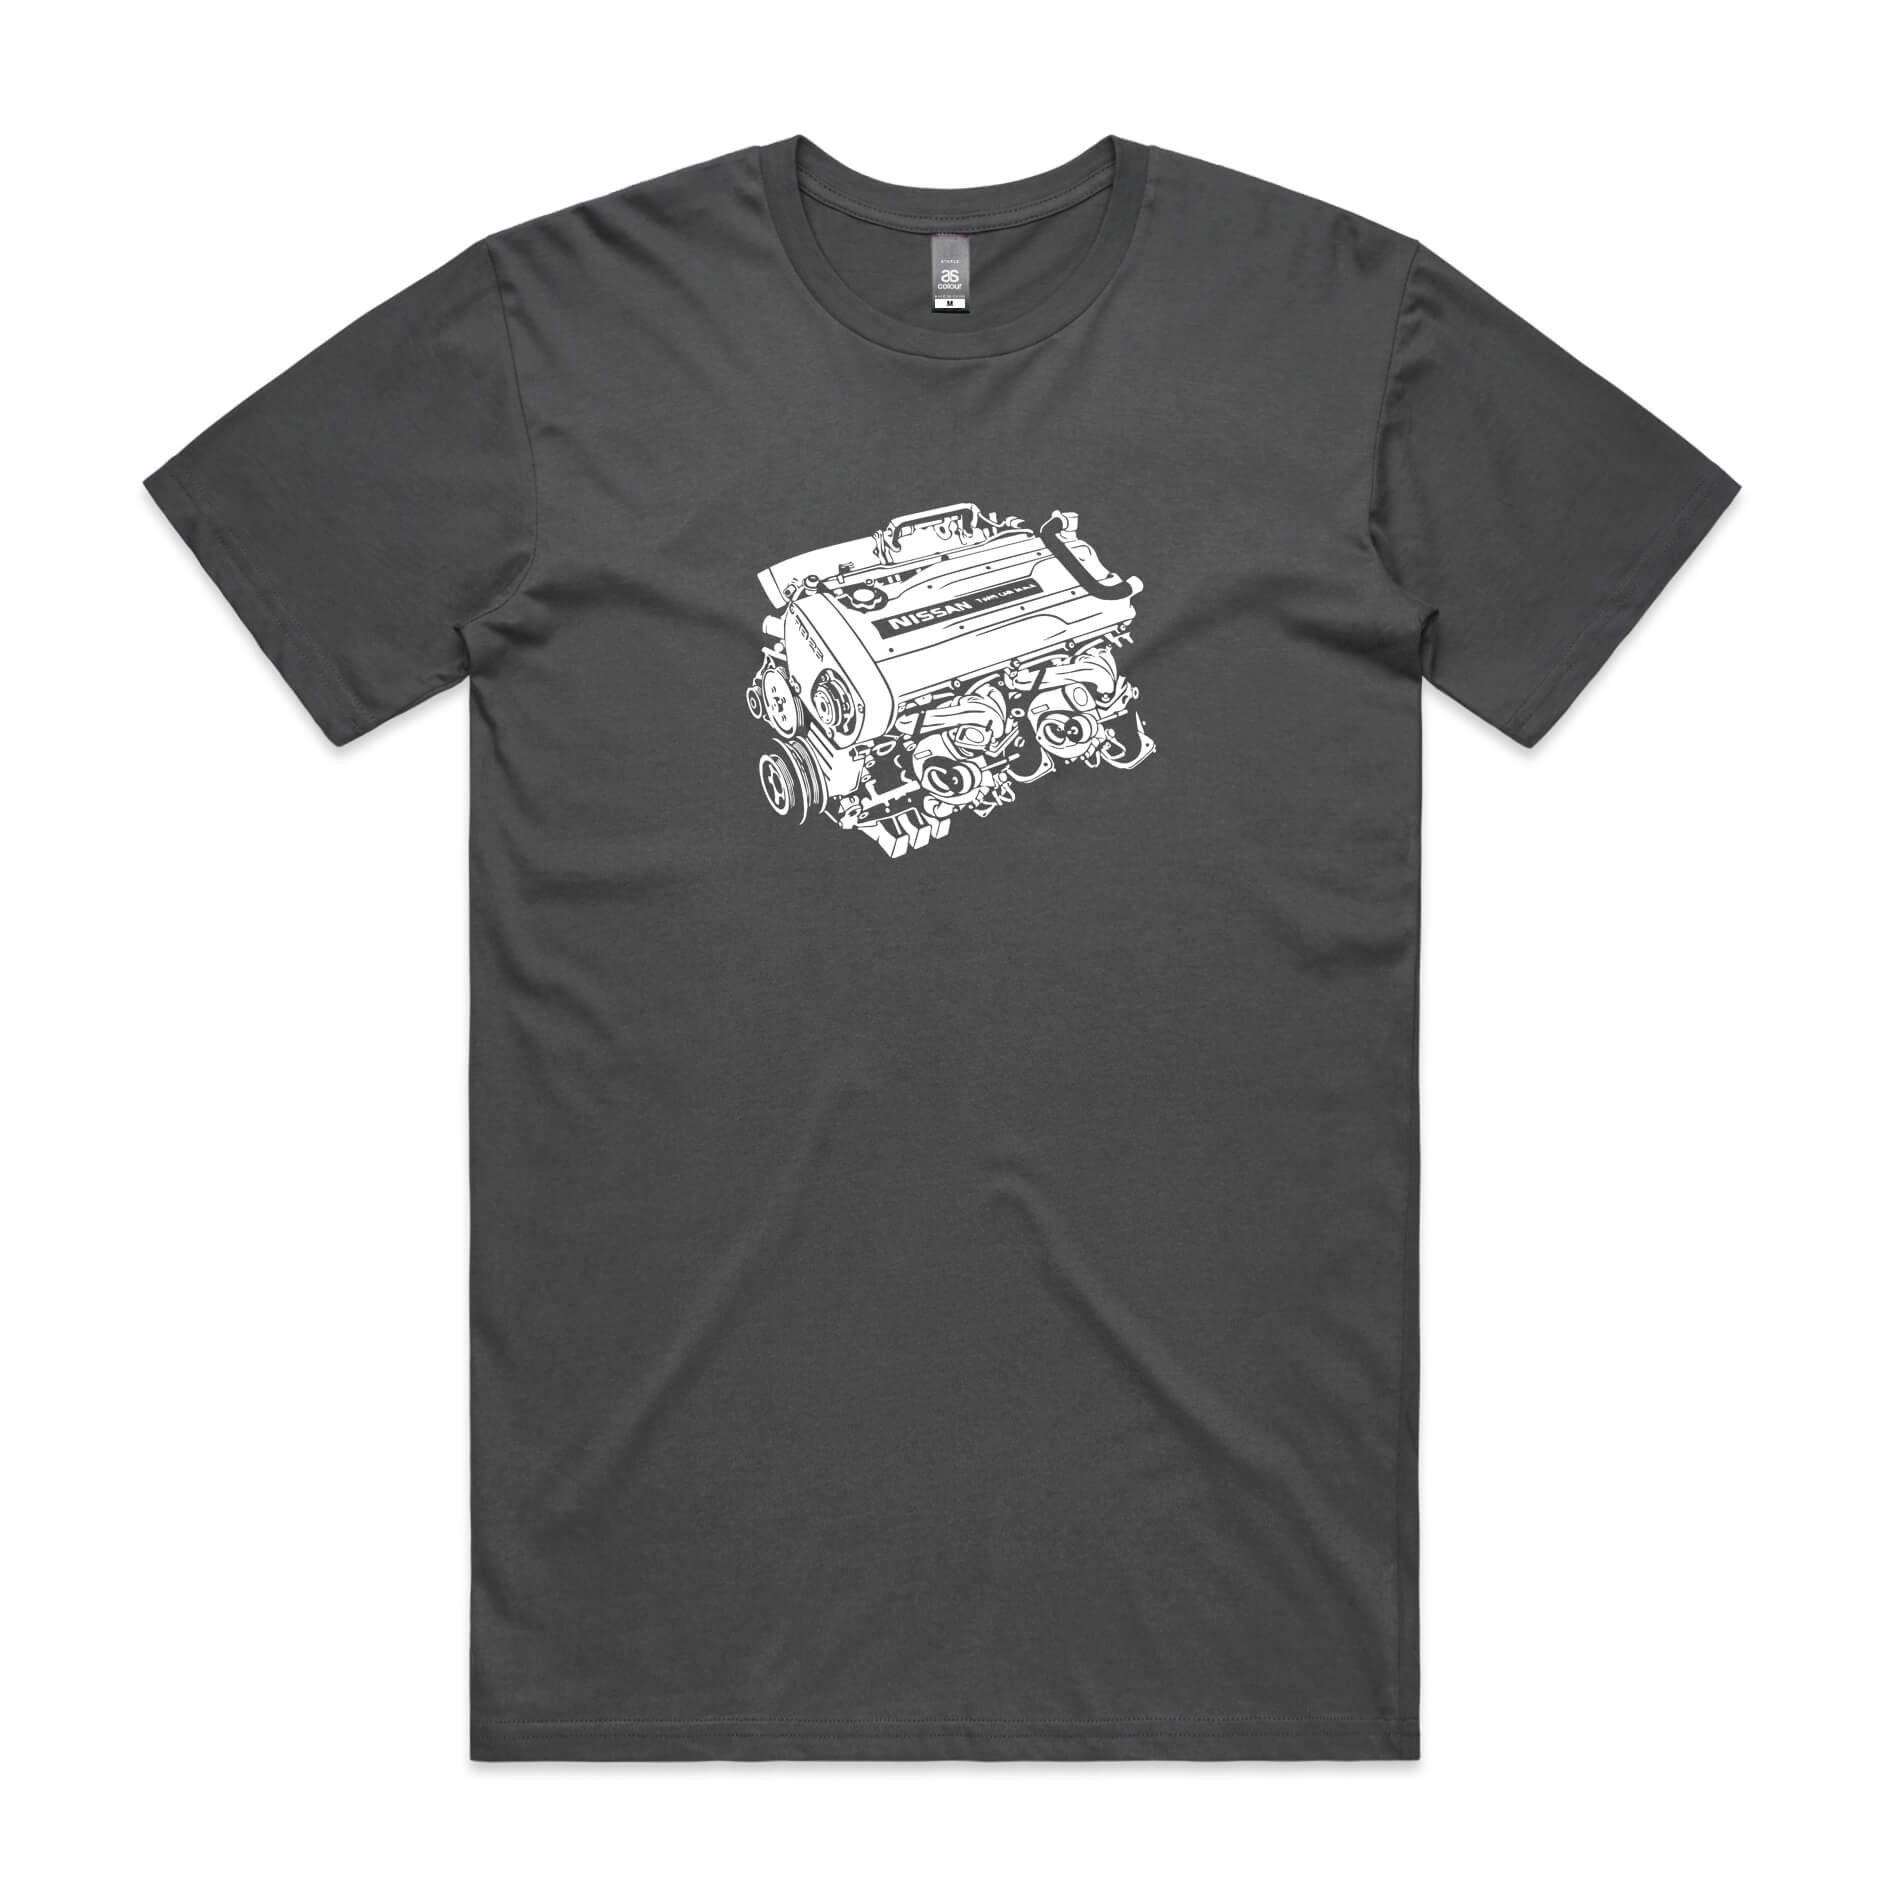 Charcoal grey T-shirt showcasing a white Nissan RB26DETT engine silhouette graphic, perfect for car lovers.